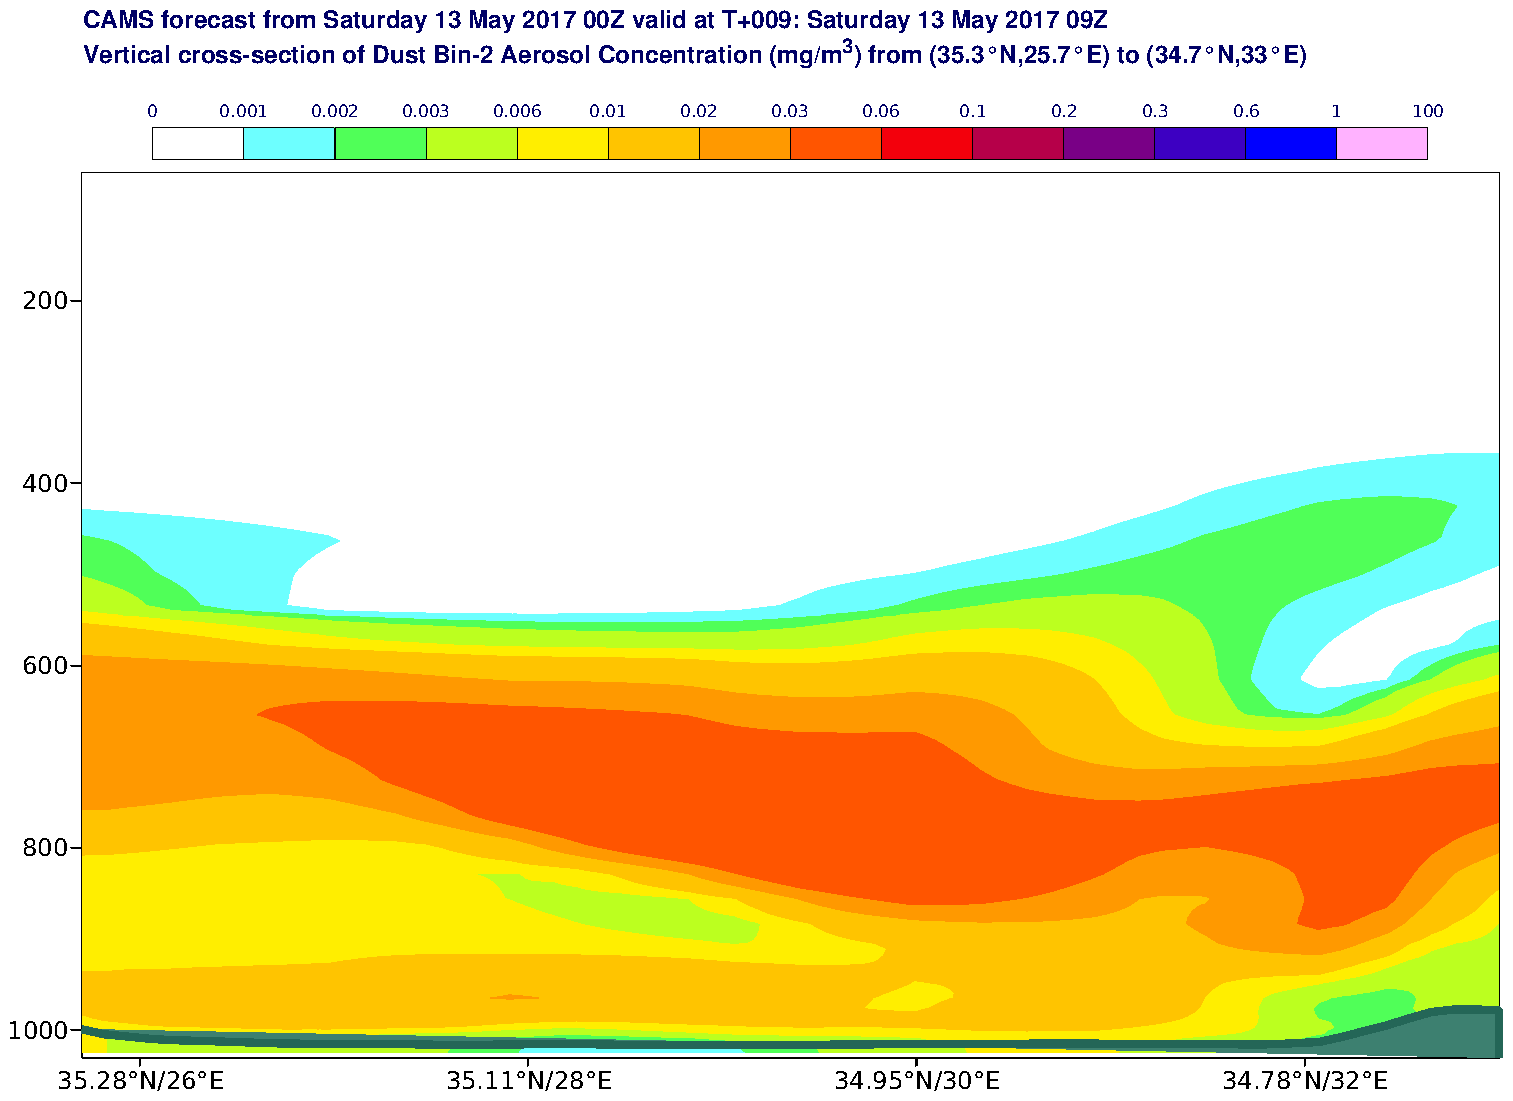 Vertical cross-section of Dust Bin-2 Aerosol Concentration (mg/m3) valid at T9 - 2017-05-13 09:00